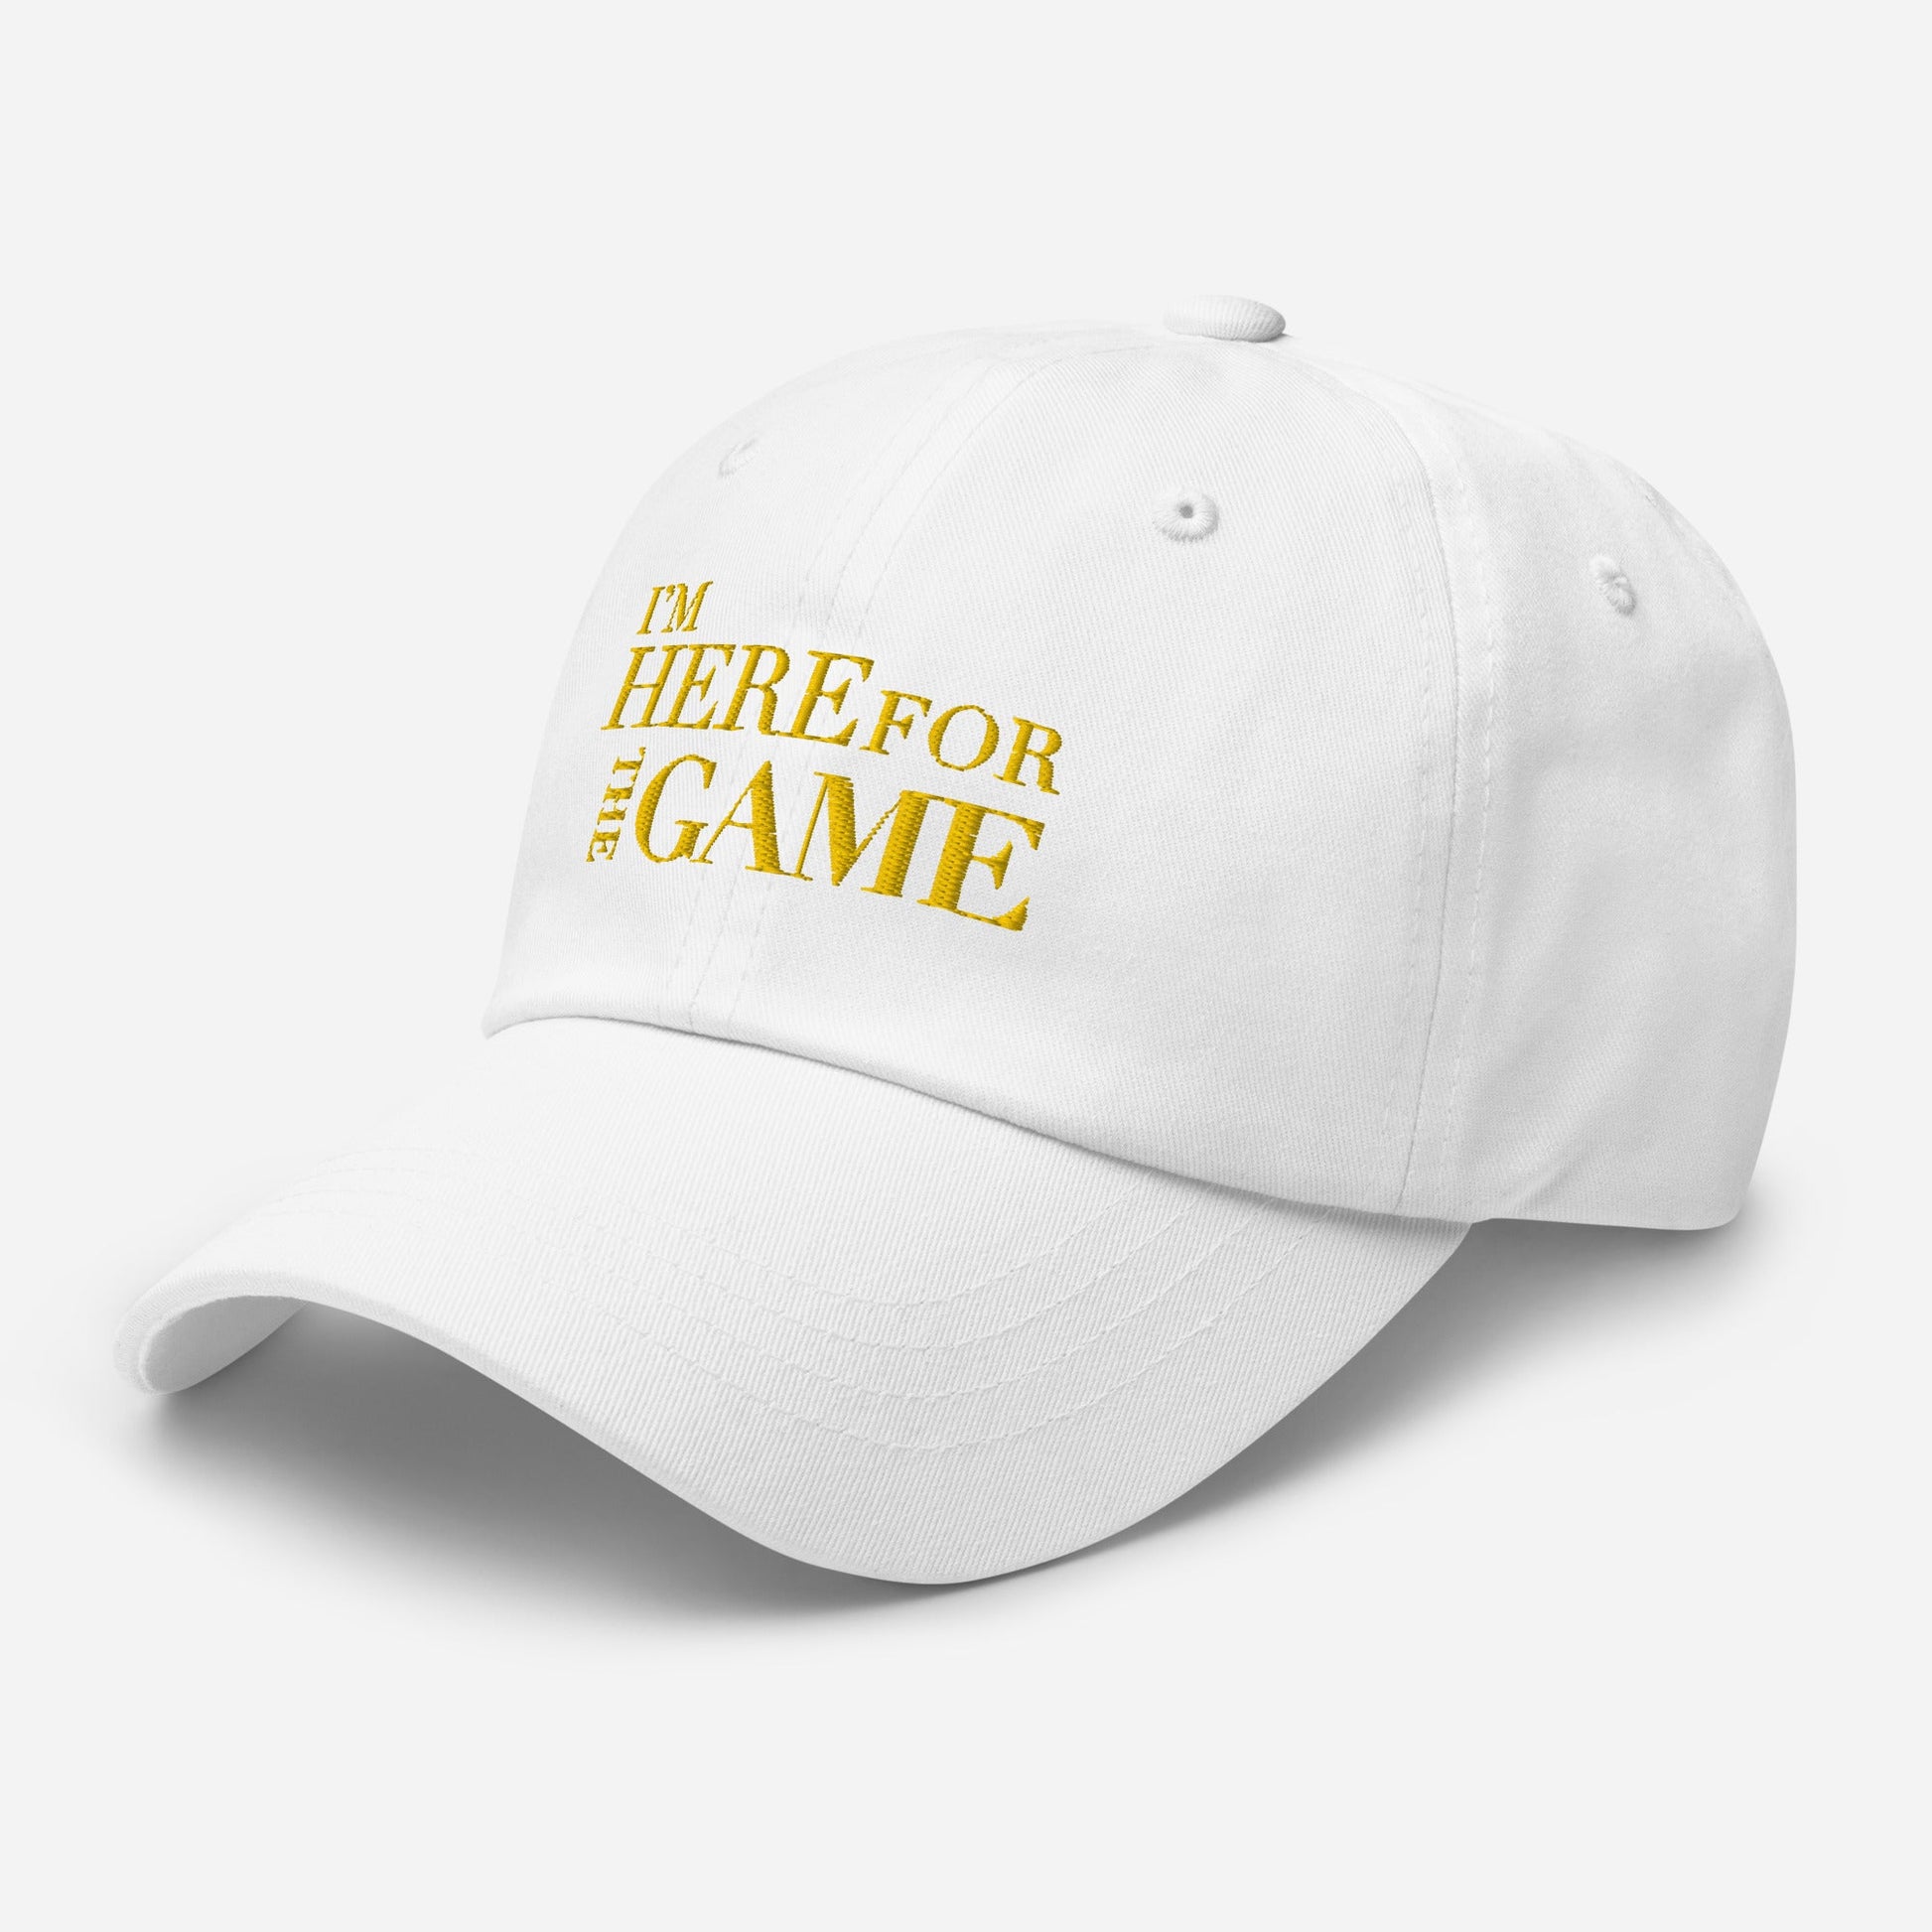 Gold Logo Hat - I’m Here For The Game